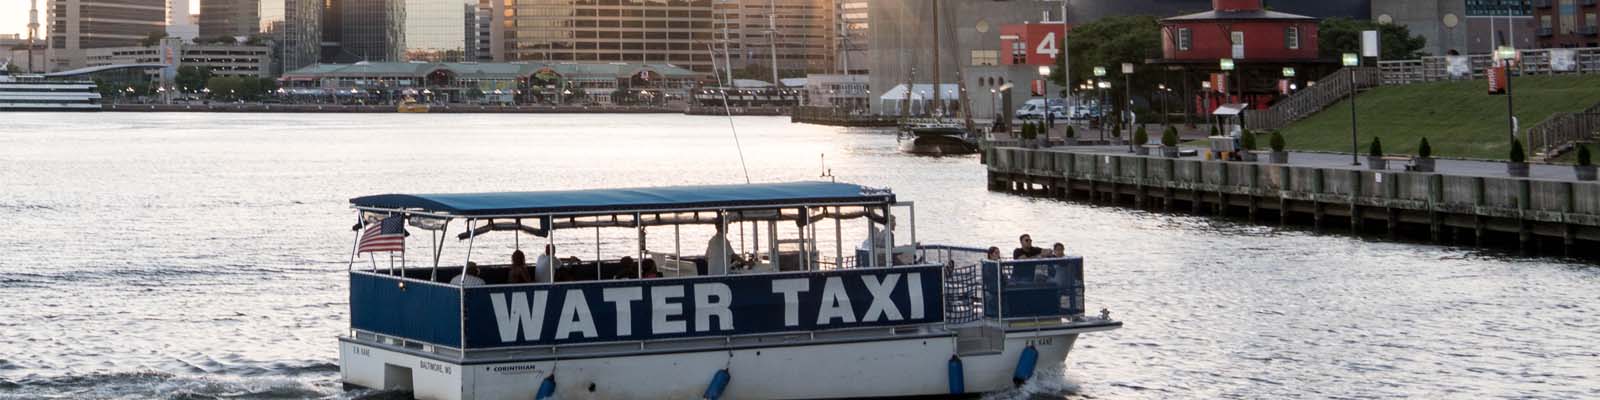 This is an image of a water taxi boat in Baltimore Maryland where ASTA-USA provides professional translation services.